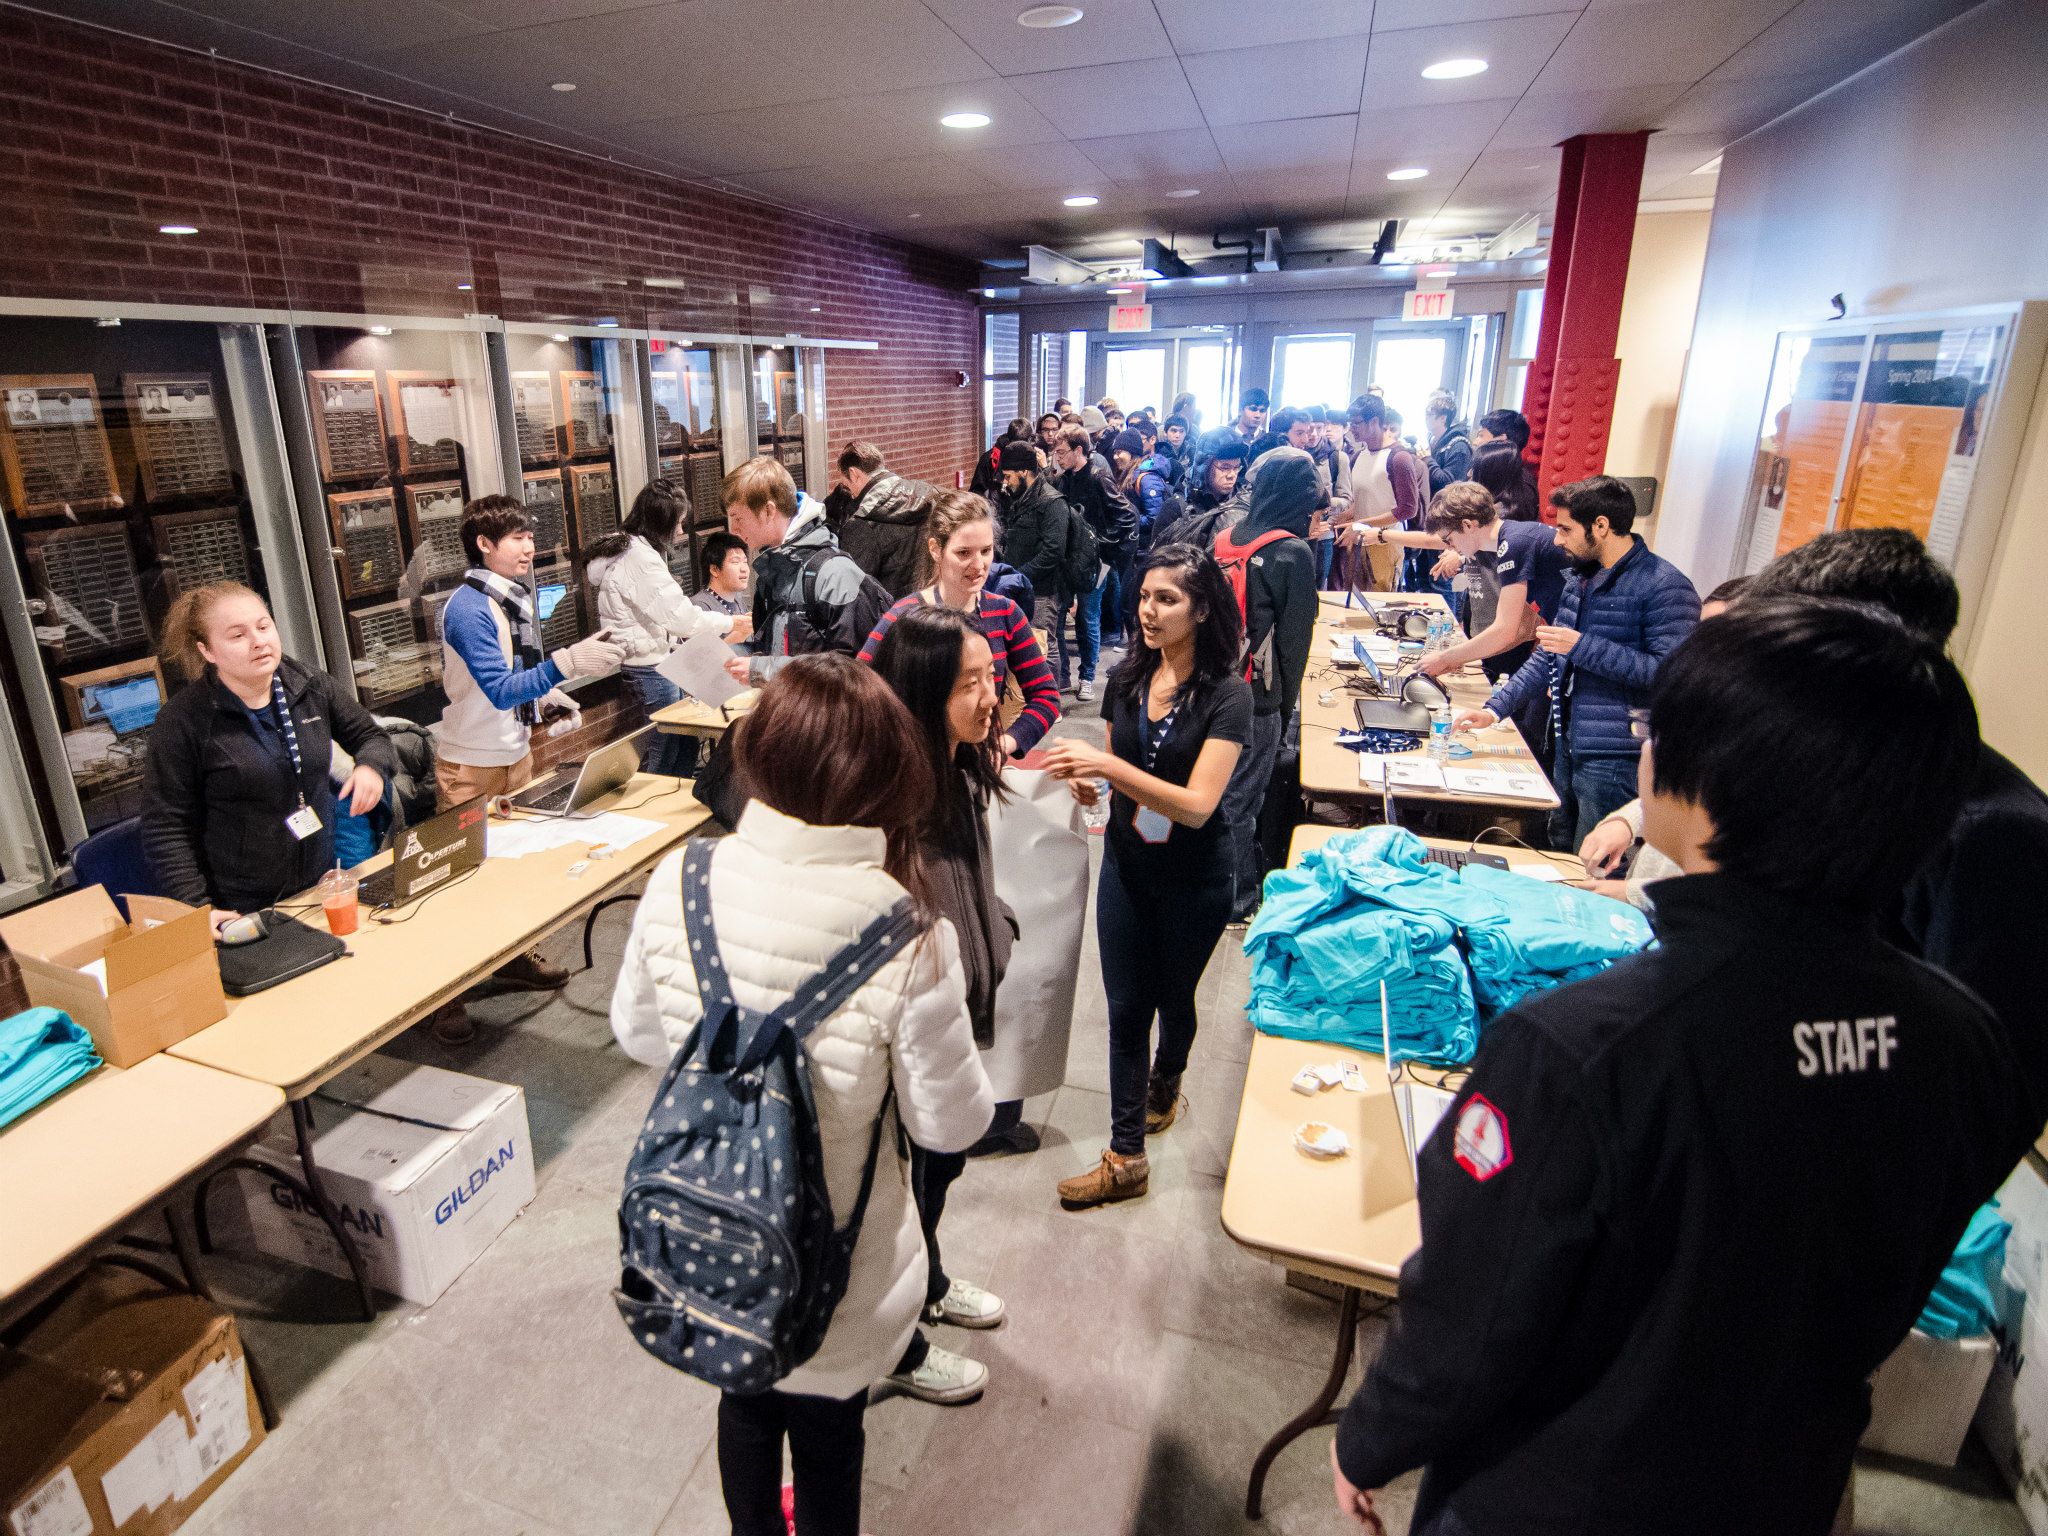 Over 900 students pour into the Siebel Center from across the country to check in for HackIllinois 2015. Photo by Priten Vora.